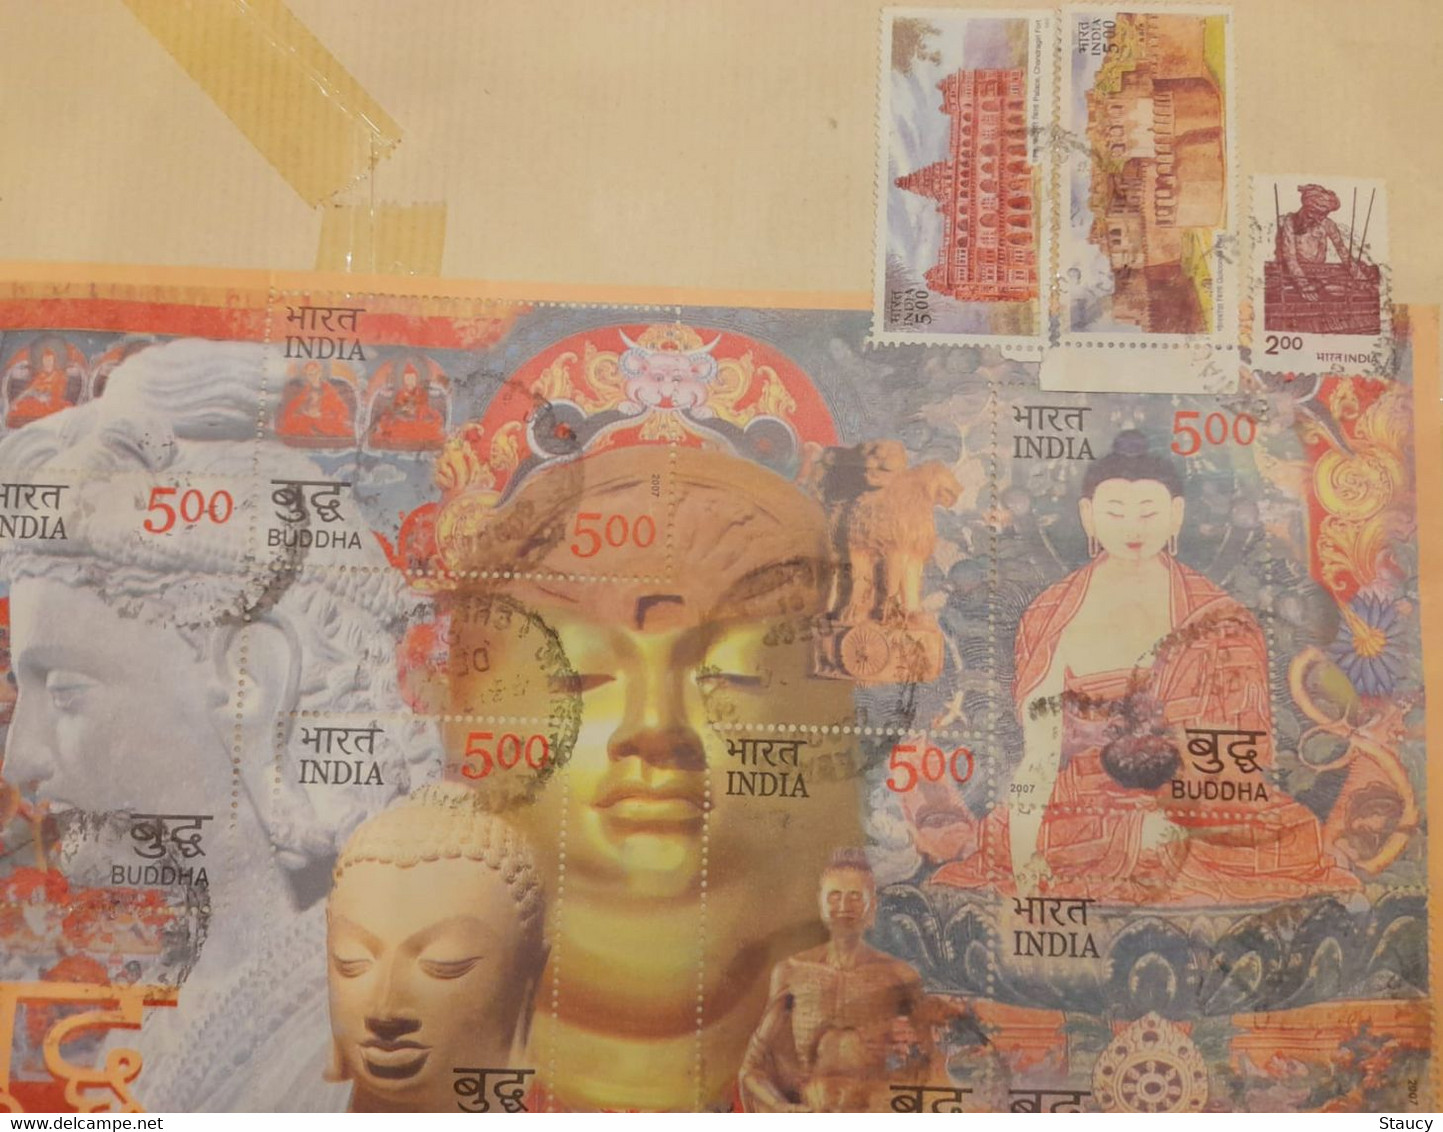 INDIA 2007 2550 YEARS OF MAHAPARINIRVANA OF THE BUDDHA Miniature Sheet MS Franked On Registered Speed Post Cover - Hinduism